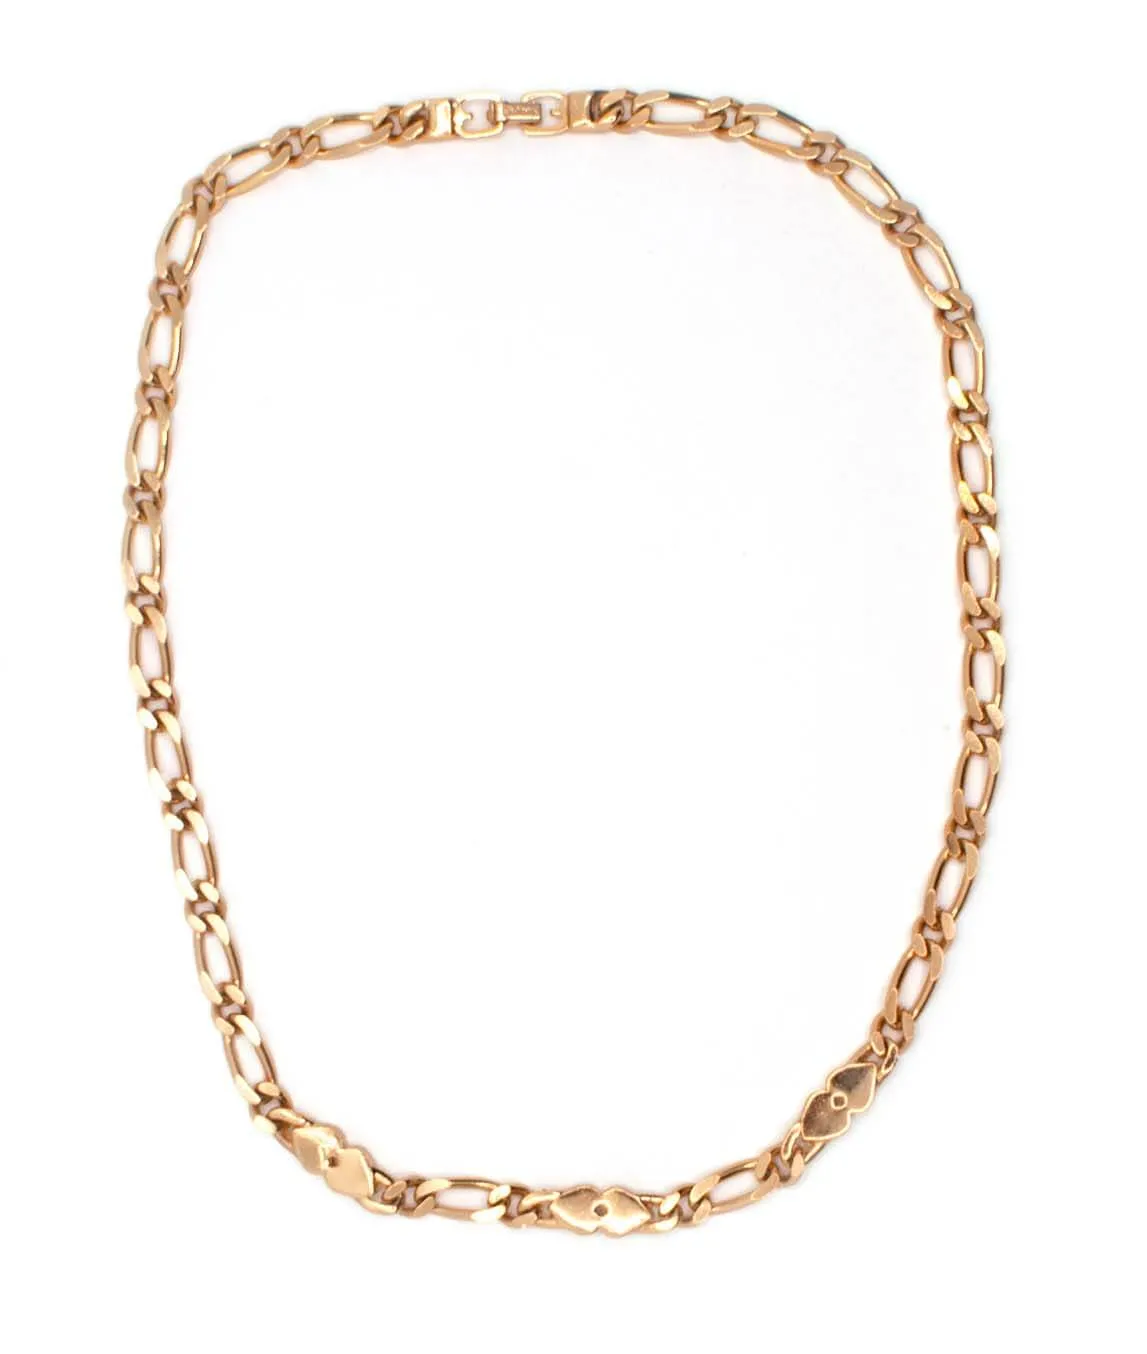 Fancy link gold tone chain necklace by Grosse with crystal hearts